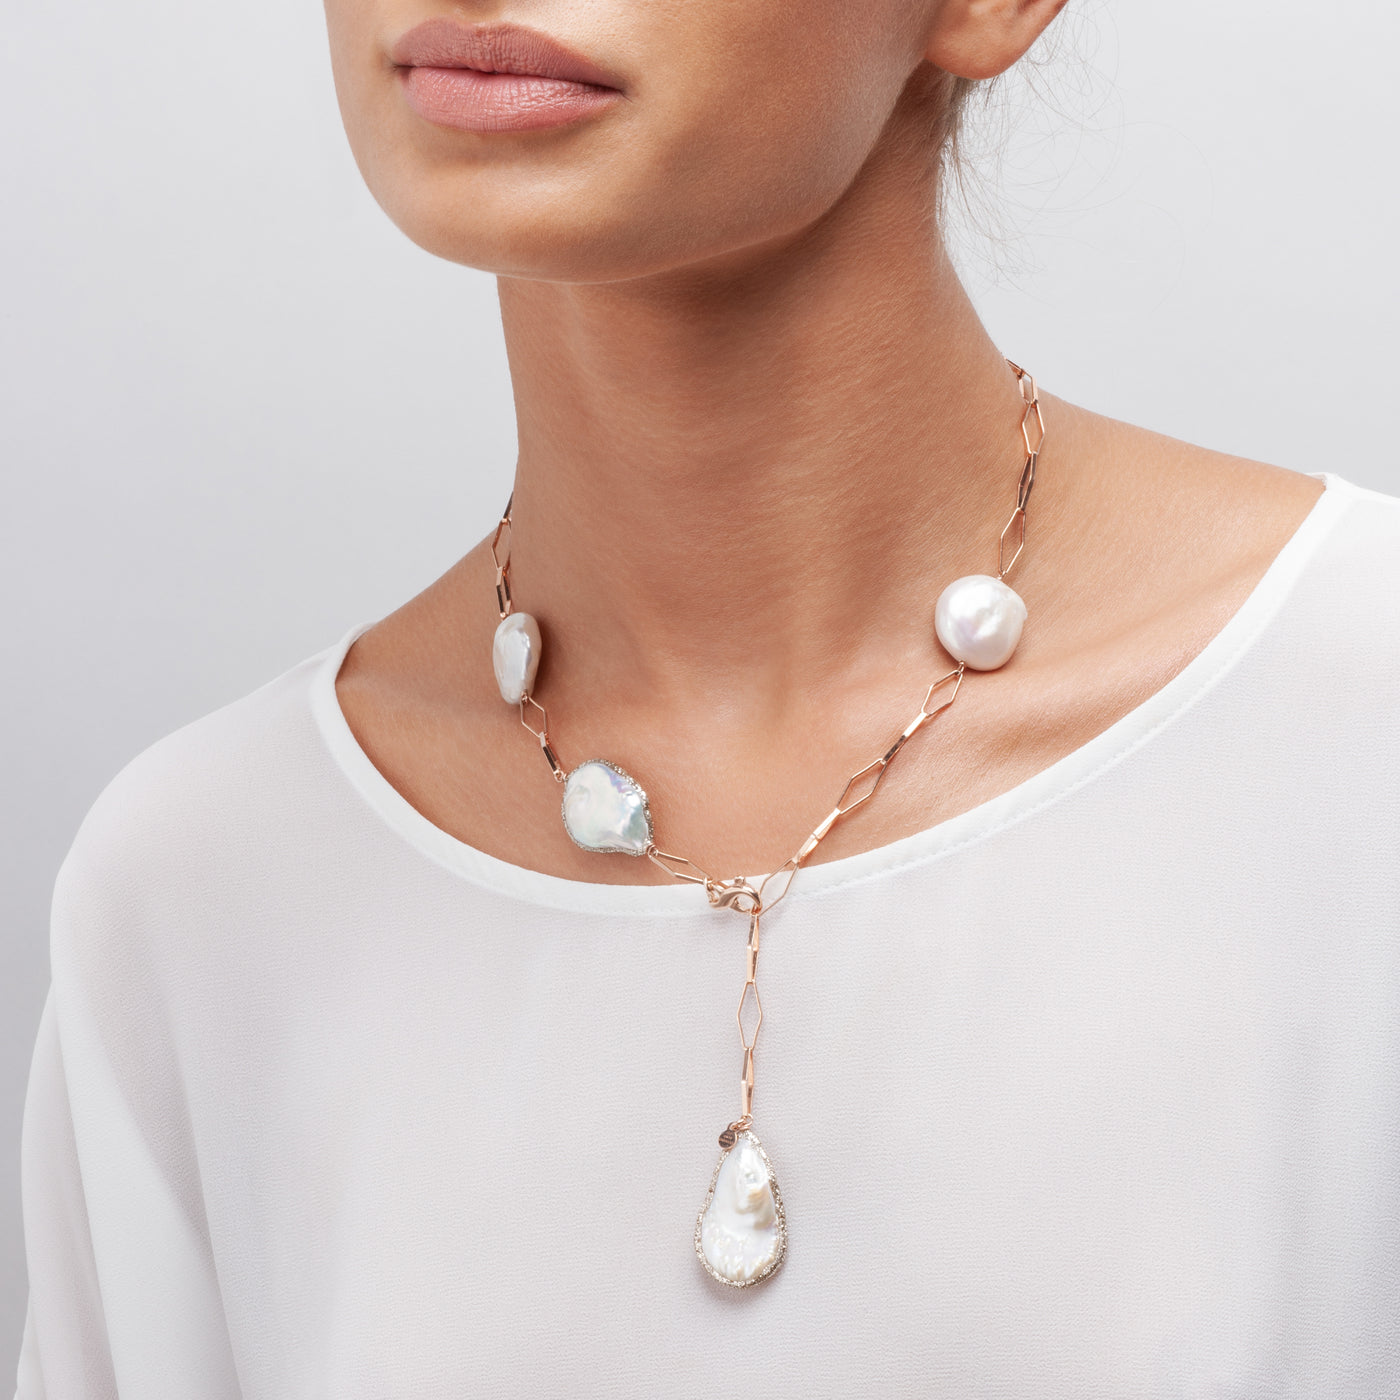 Multi fresh water pearl necklace